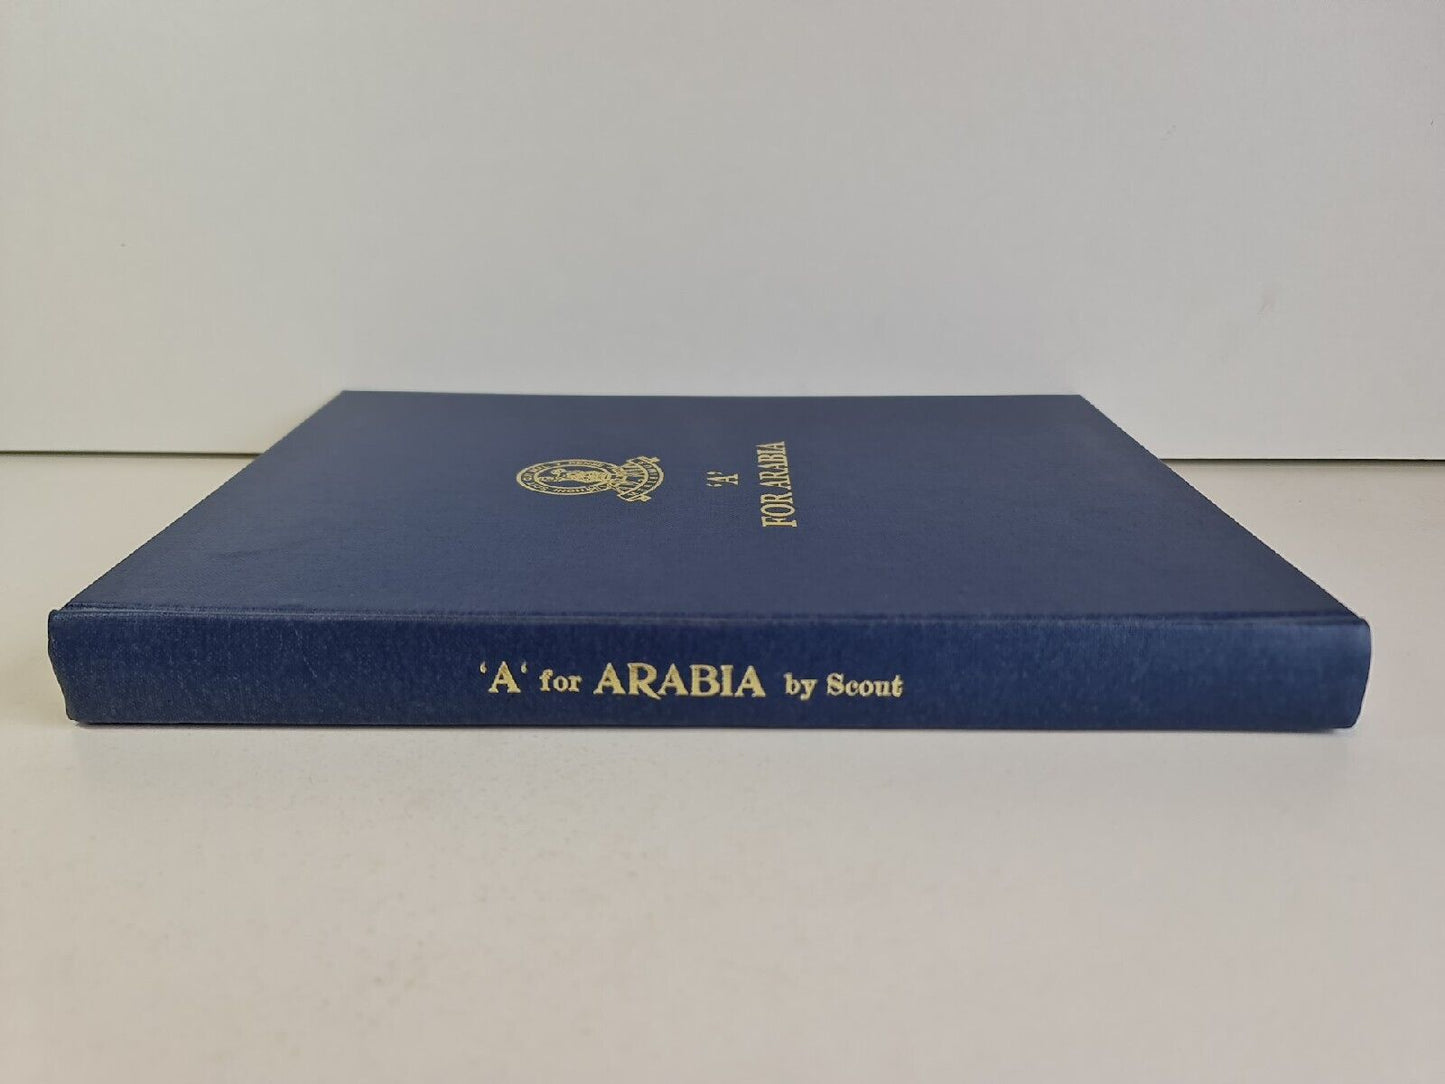 SIGNED 'A' is for Arabia by Scout (Simon Frazer) -  49/60